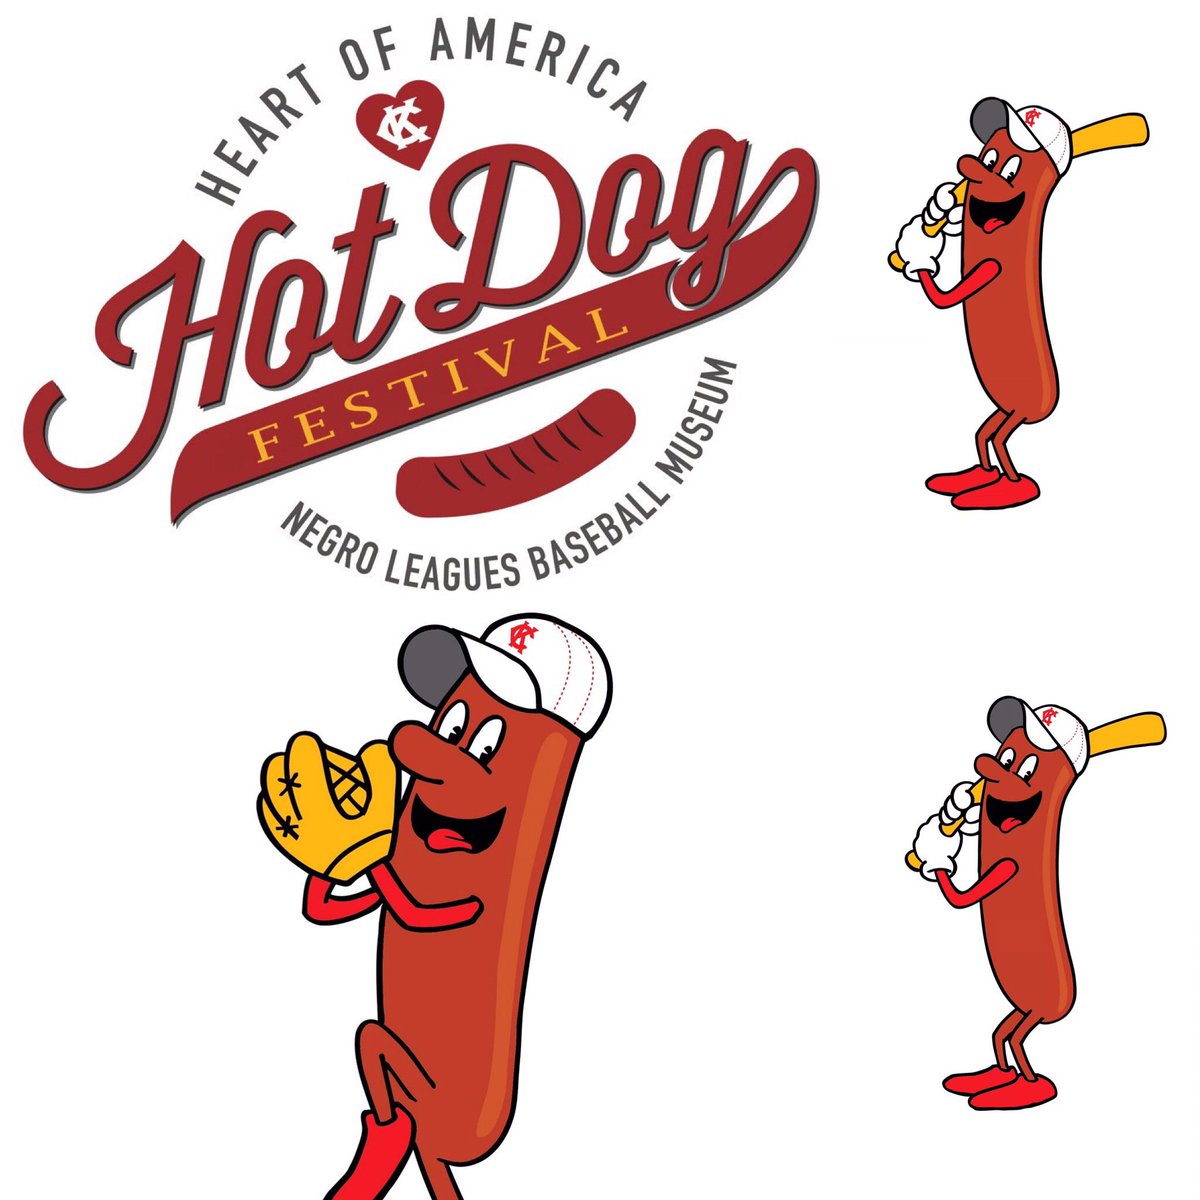 SAVE THE DATE: Make plans to join the @NLBMuseumKC for the 2024 Heart of America Hotdog Festival, Saturday, Aug 3! Stay tuned for the “Grillin & Groovin” details including the return of a legendary hotdog and a sensational live band lineup! @NLBMHotDogFest @HyVee @Royals @VisitKC